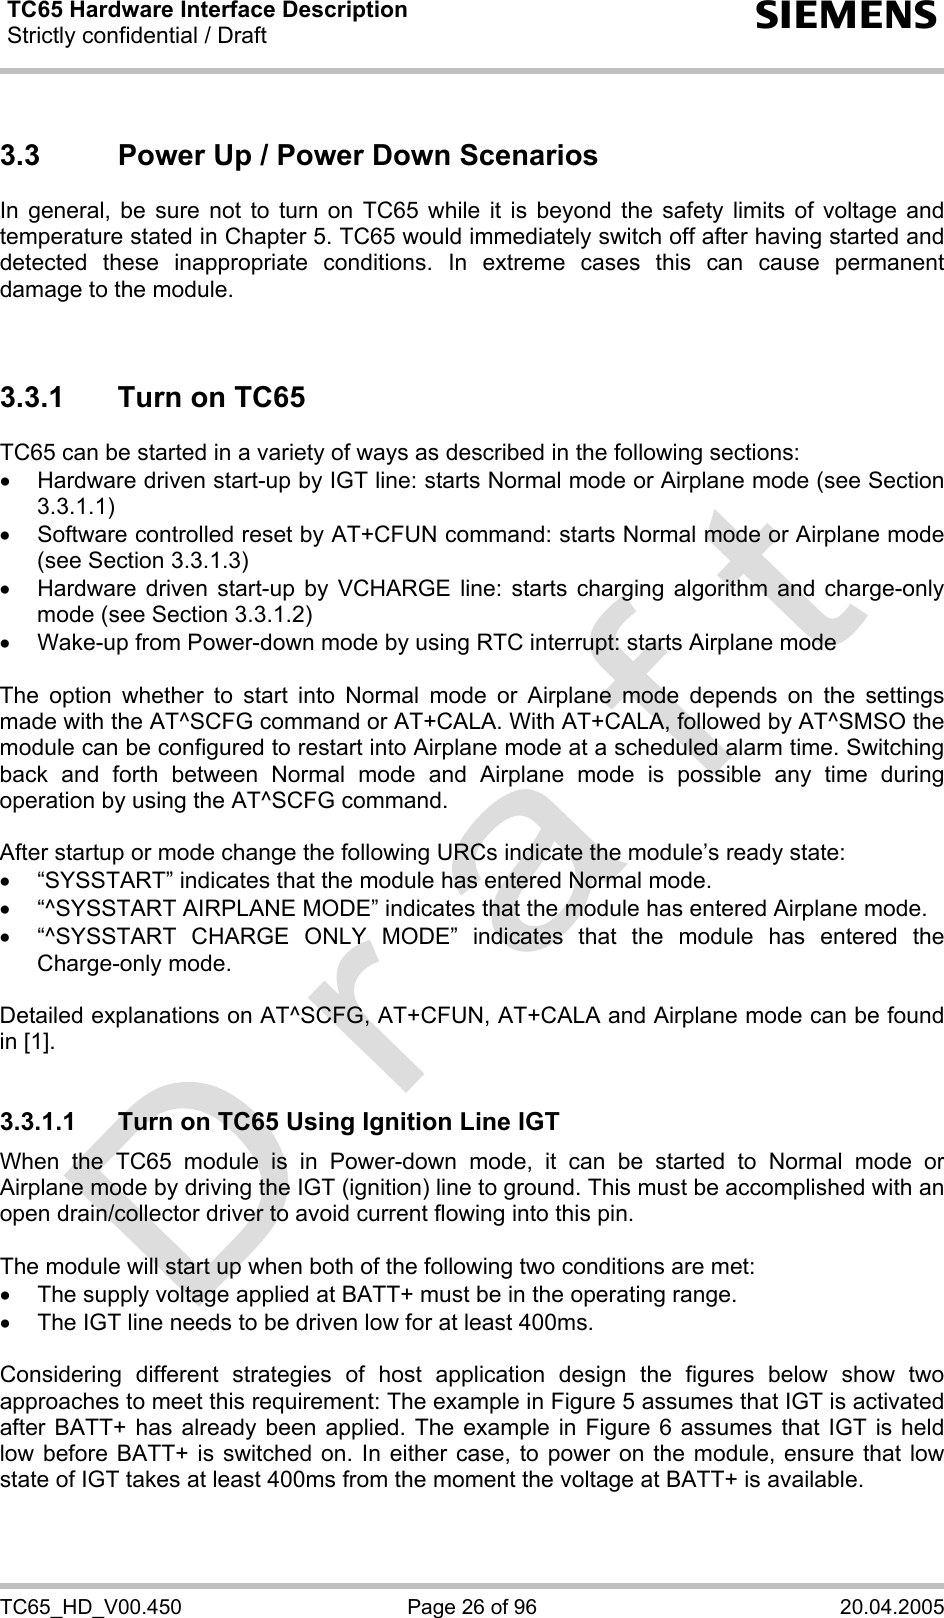 TC65 Hardware Interface Description Strictly confidential / Draft  s TC65_HD_V00.450  Page 26 of 96  20.04.2005 3.3  Power Up / Power Down Scenarios In general, be sure not to turn on TC65 while it is beyond the safety limits of voltage and temperature stated in Chapter 5. TC65 would immediately switch off after having started and detected these inappropriate conditions. In extreme cases this can cause permanent damage to the module.    3.3.1  Turn on TC65 TC65 can be started in a variety of ways as described in the following sections: •  Hardware driven start-up by IGT line: starts Normal mode or Airplane mode (see Section 3.3.1.1) •  Software controlled reset by AT+CFUN command: starts Normal mode or Airplane mode (see Section 3.3.1.3) •  Hardware driven start-up by VCHARGE line: starts charging algorithm and charge-only mode (see Section 3.3.1.2) •  Wake-up from Power-down mode by using RTC interrupt: starts Airplane mode  The option whether to start into Normal mode or Airplane mode depends on the settings made with the AT^SCFG command or AT+CALA. With AT+CALA, followed by AT^SMSO the module can be configured to restart into Airplane mode at a scheduled alarm time. Switching back and forth between Normal mode and Airplane mode is possible any time during operation by using the AT^SCFG command.   After startup or mode change the following URCs indicate the module’s ready state: •  “SYSSTART” indicates that the module has entered Normal mode. •  “^SYSSTART AIRPLANE MODE” indicates that the module has entered Airplane mode. •  “^SYSSTART CHARGE ONLY MODE” indicates that the module has entered the Charge-only mode.  Detailed explanations on AT^SCFG, AT+CFUN, AT+CALA and Airplane mode can be found in [1].   3.3.1.1  Turn on TC65 Using Ignition Line IGT When the TC65 module is in Power-down mode, it can be started to Normal mode or Airplane mode by driving the IGT (ignition) line to ground. This must be accomplished with an open drain/collector driver to avoid current flowing into this pin.   The module will start up when both of the following two conditions are met:  •  The supply voltage applied at BATT+ must be in the operating range.  •  The IGT line needs to be driven low for at least 400ms.  Considering different strategies of host application design the figures below show two approaches to meet this requirement: The example in Figure 5 assumes that IGT is activated after BATT+ has already been applied. The example in Figure 6 assumes that IGT is held low before BATT+ is switched on. In either case, to power on the module, ensure that low state of IGT takes at least 400ms from the moment the voltage at BATT+ is available.  